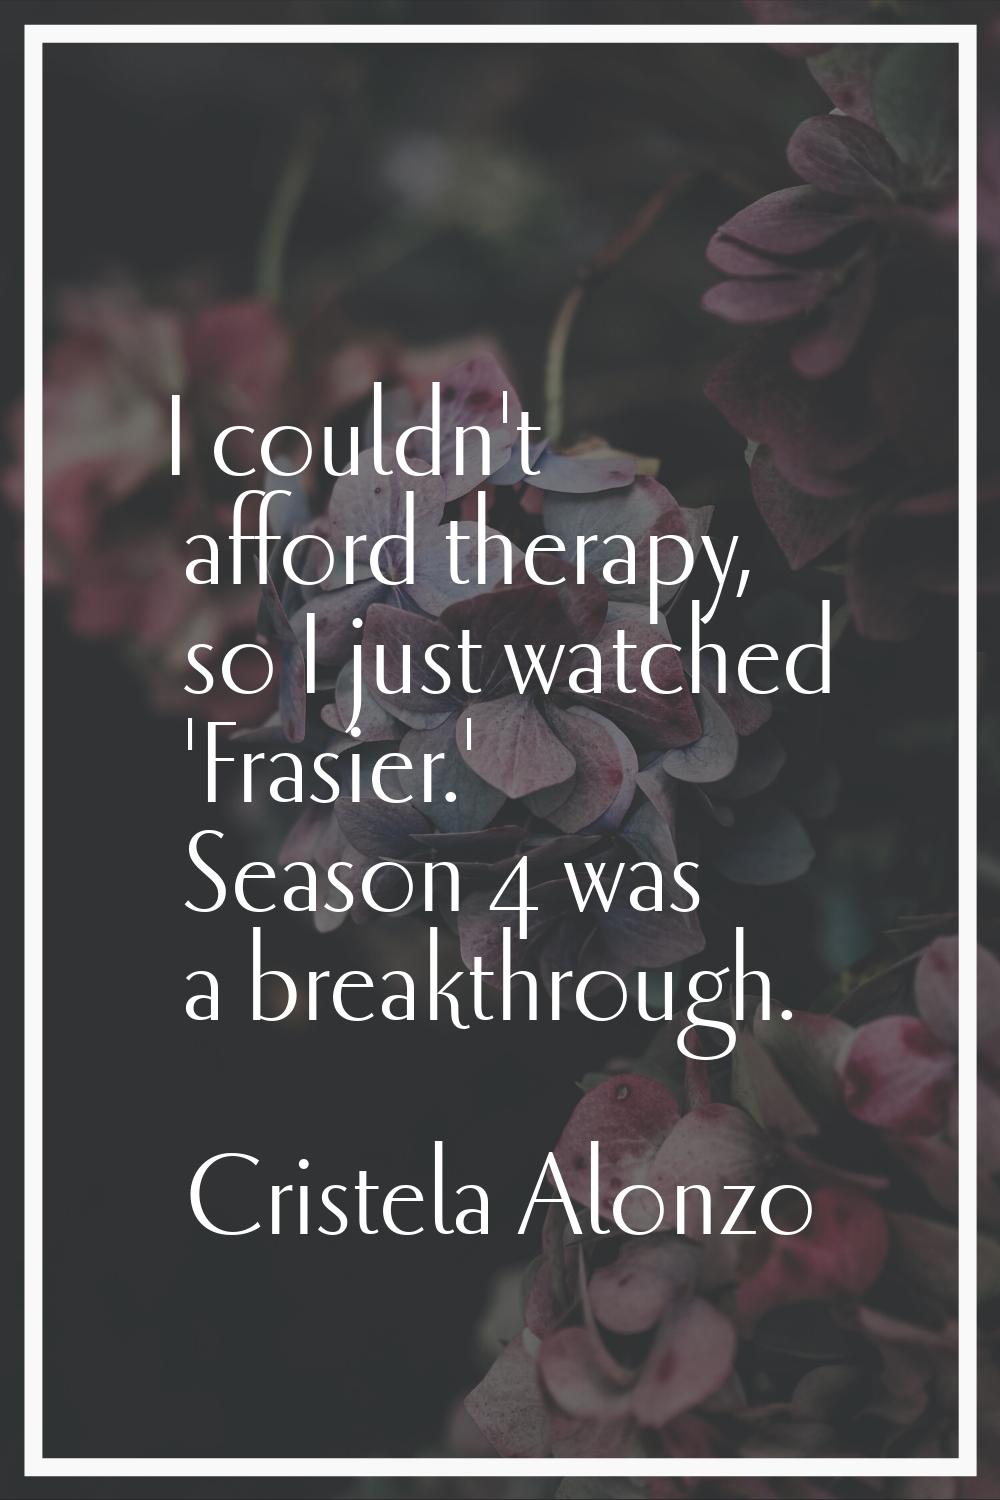 I couldn't afford therapy, so I just watched 'Frasier.' Season 4 was a breakthrough.